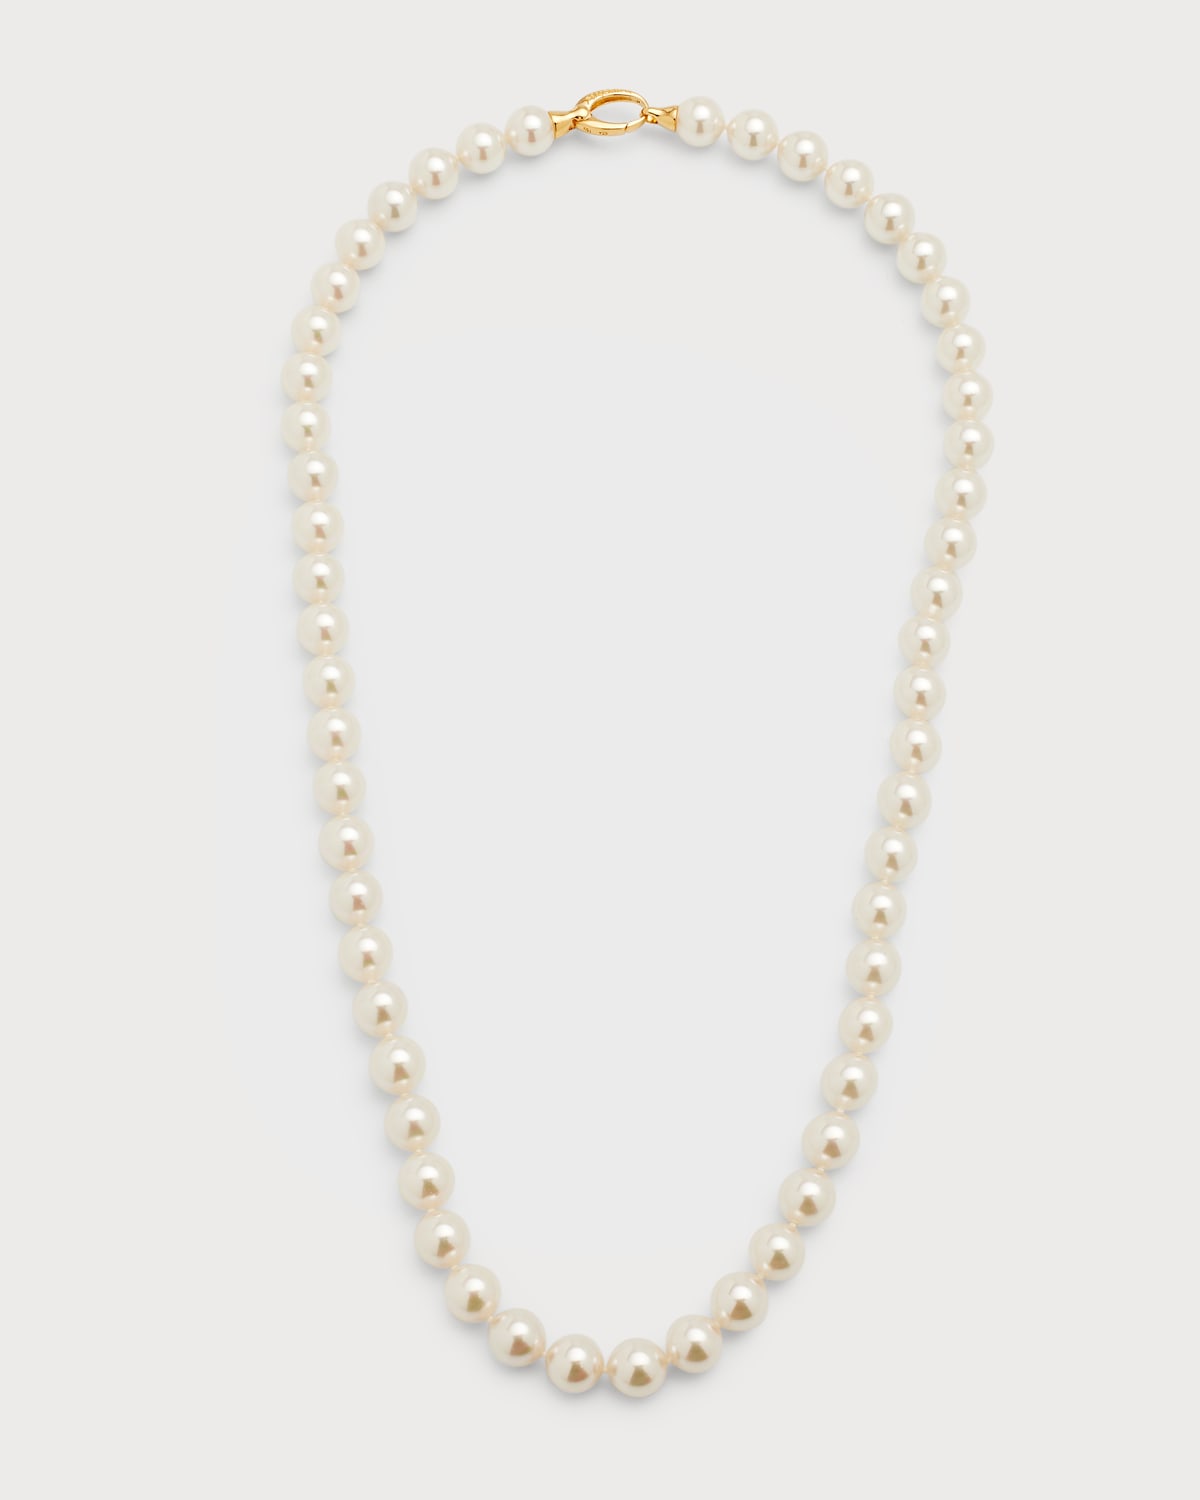 Lyra Pearl-Strand Necklace, 24"L